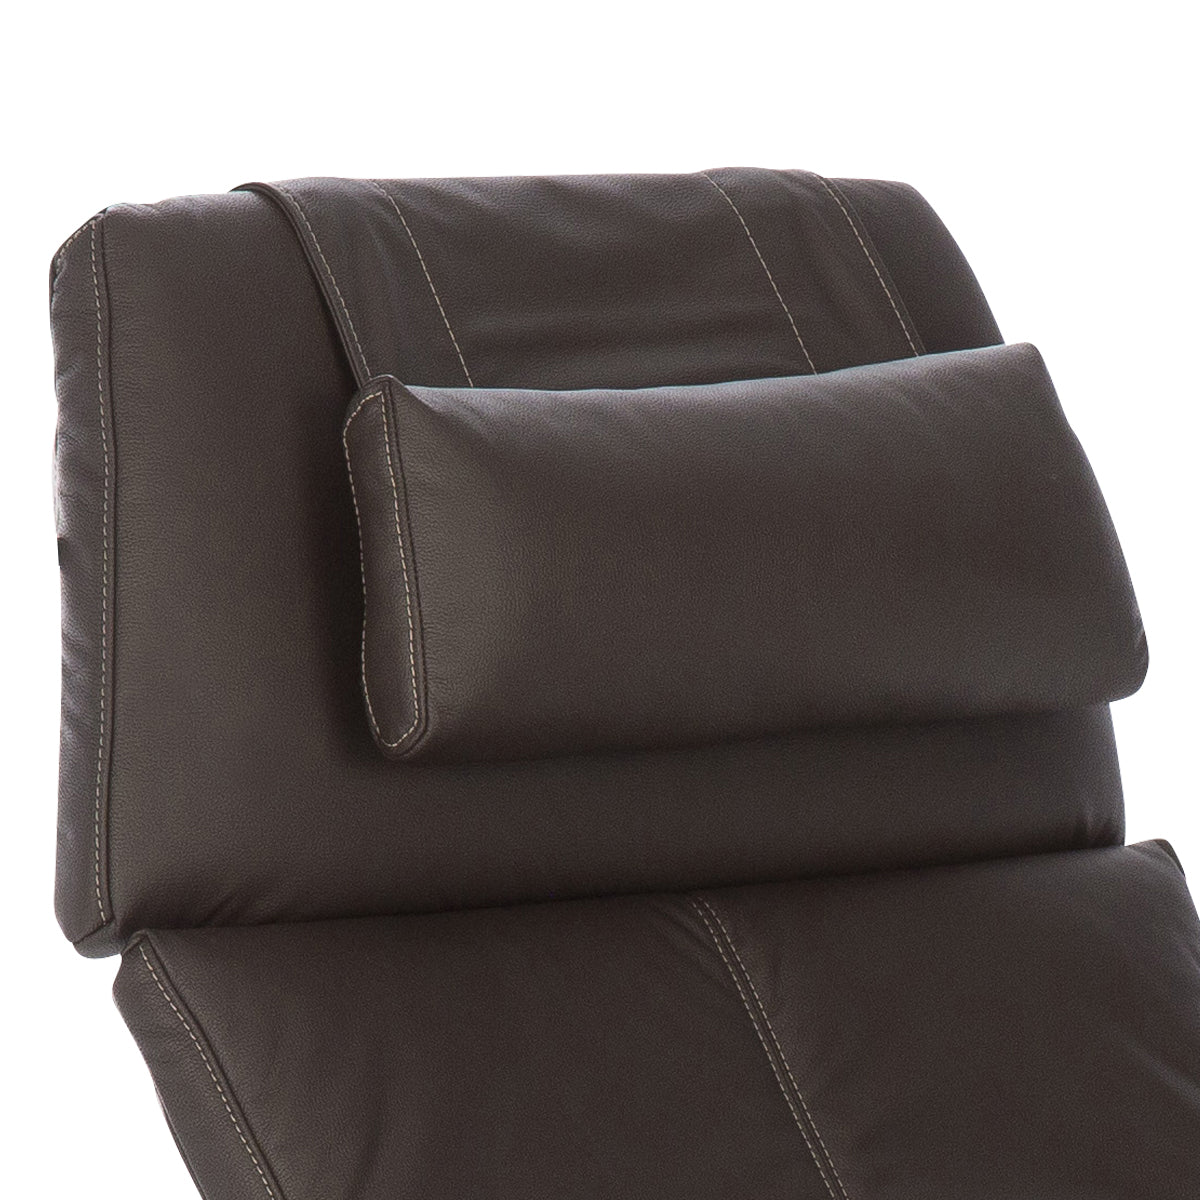 Articulating Headrest with Full Support Head Pillow